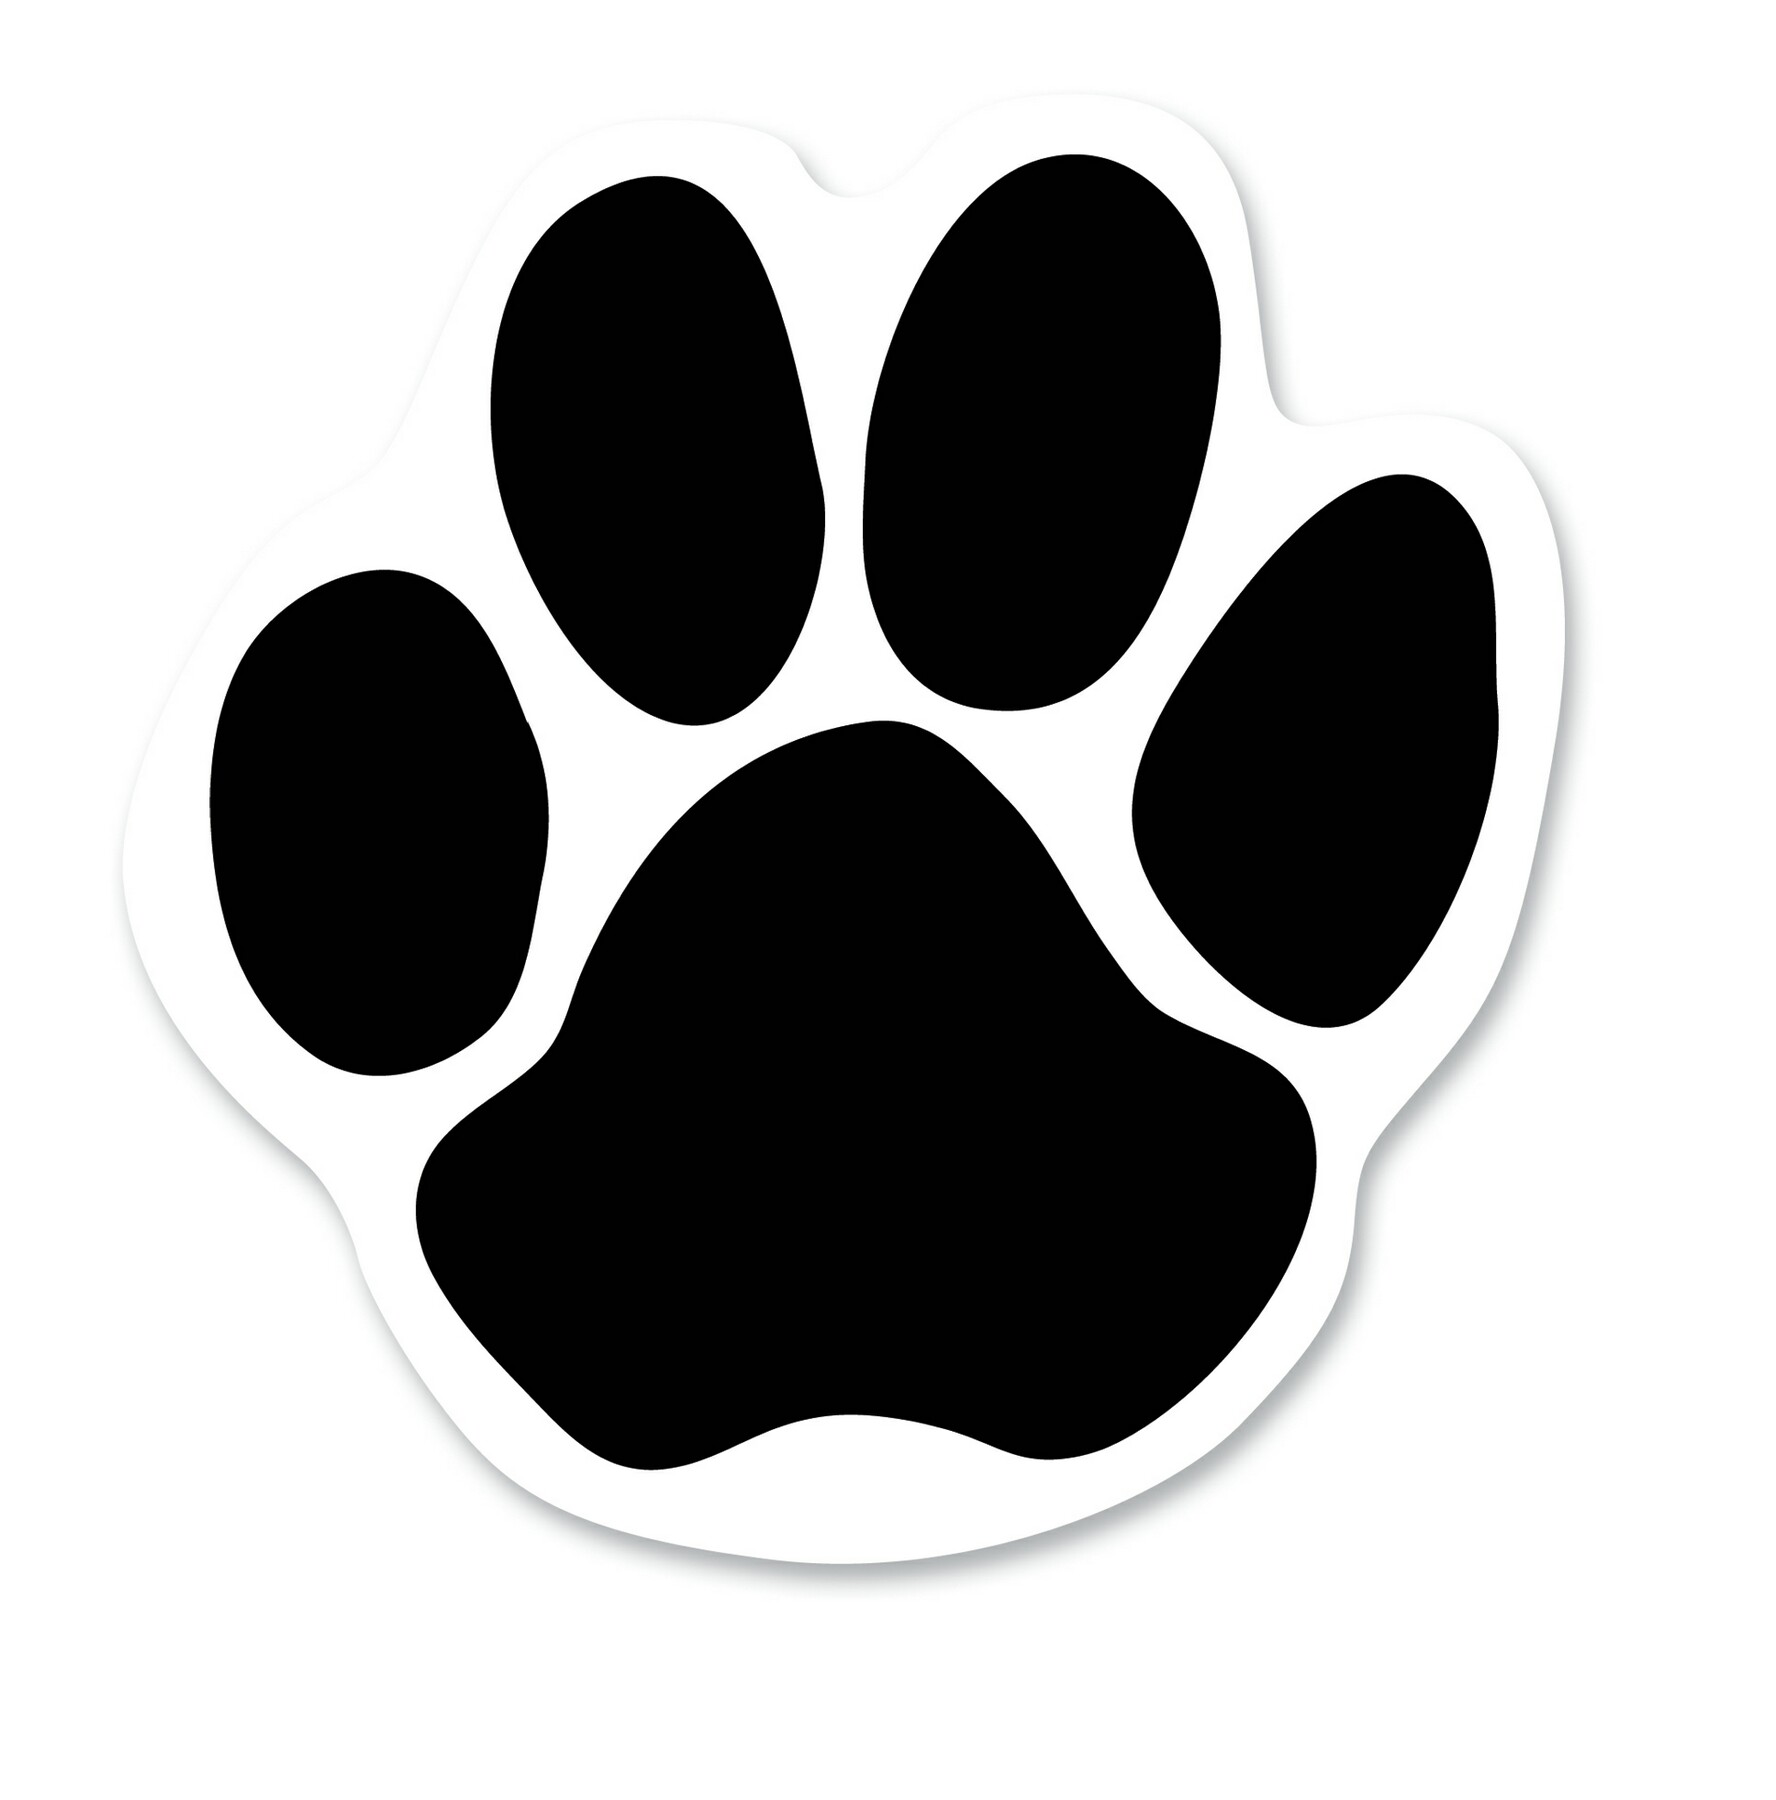 bear-paw-outline-a-simple-yet-striking-symbol-of-nature-s-power